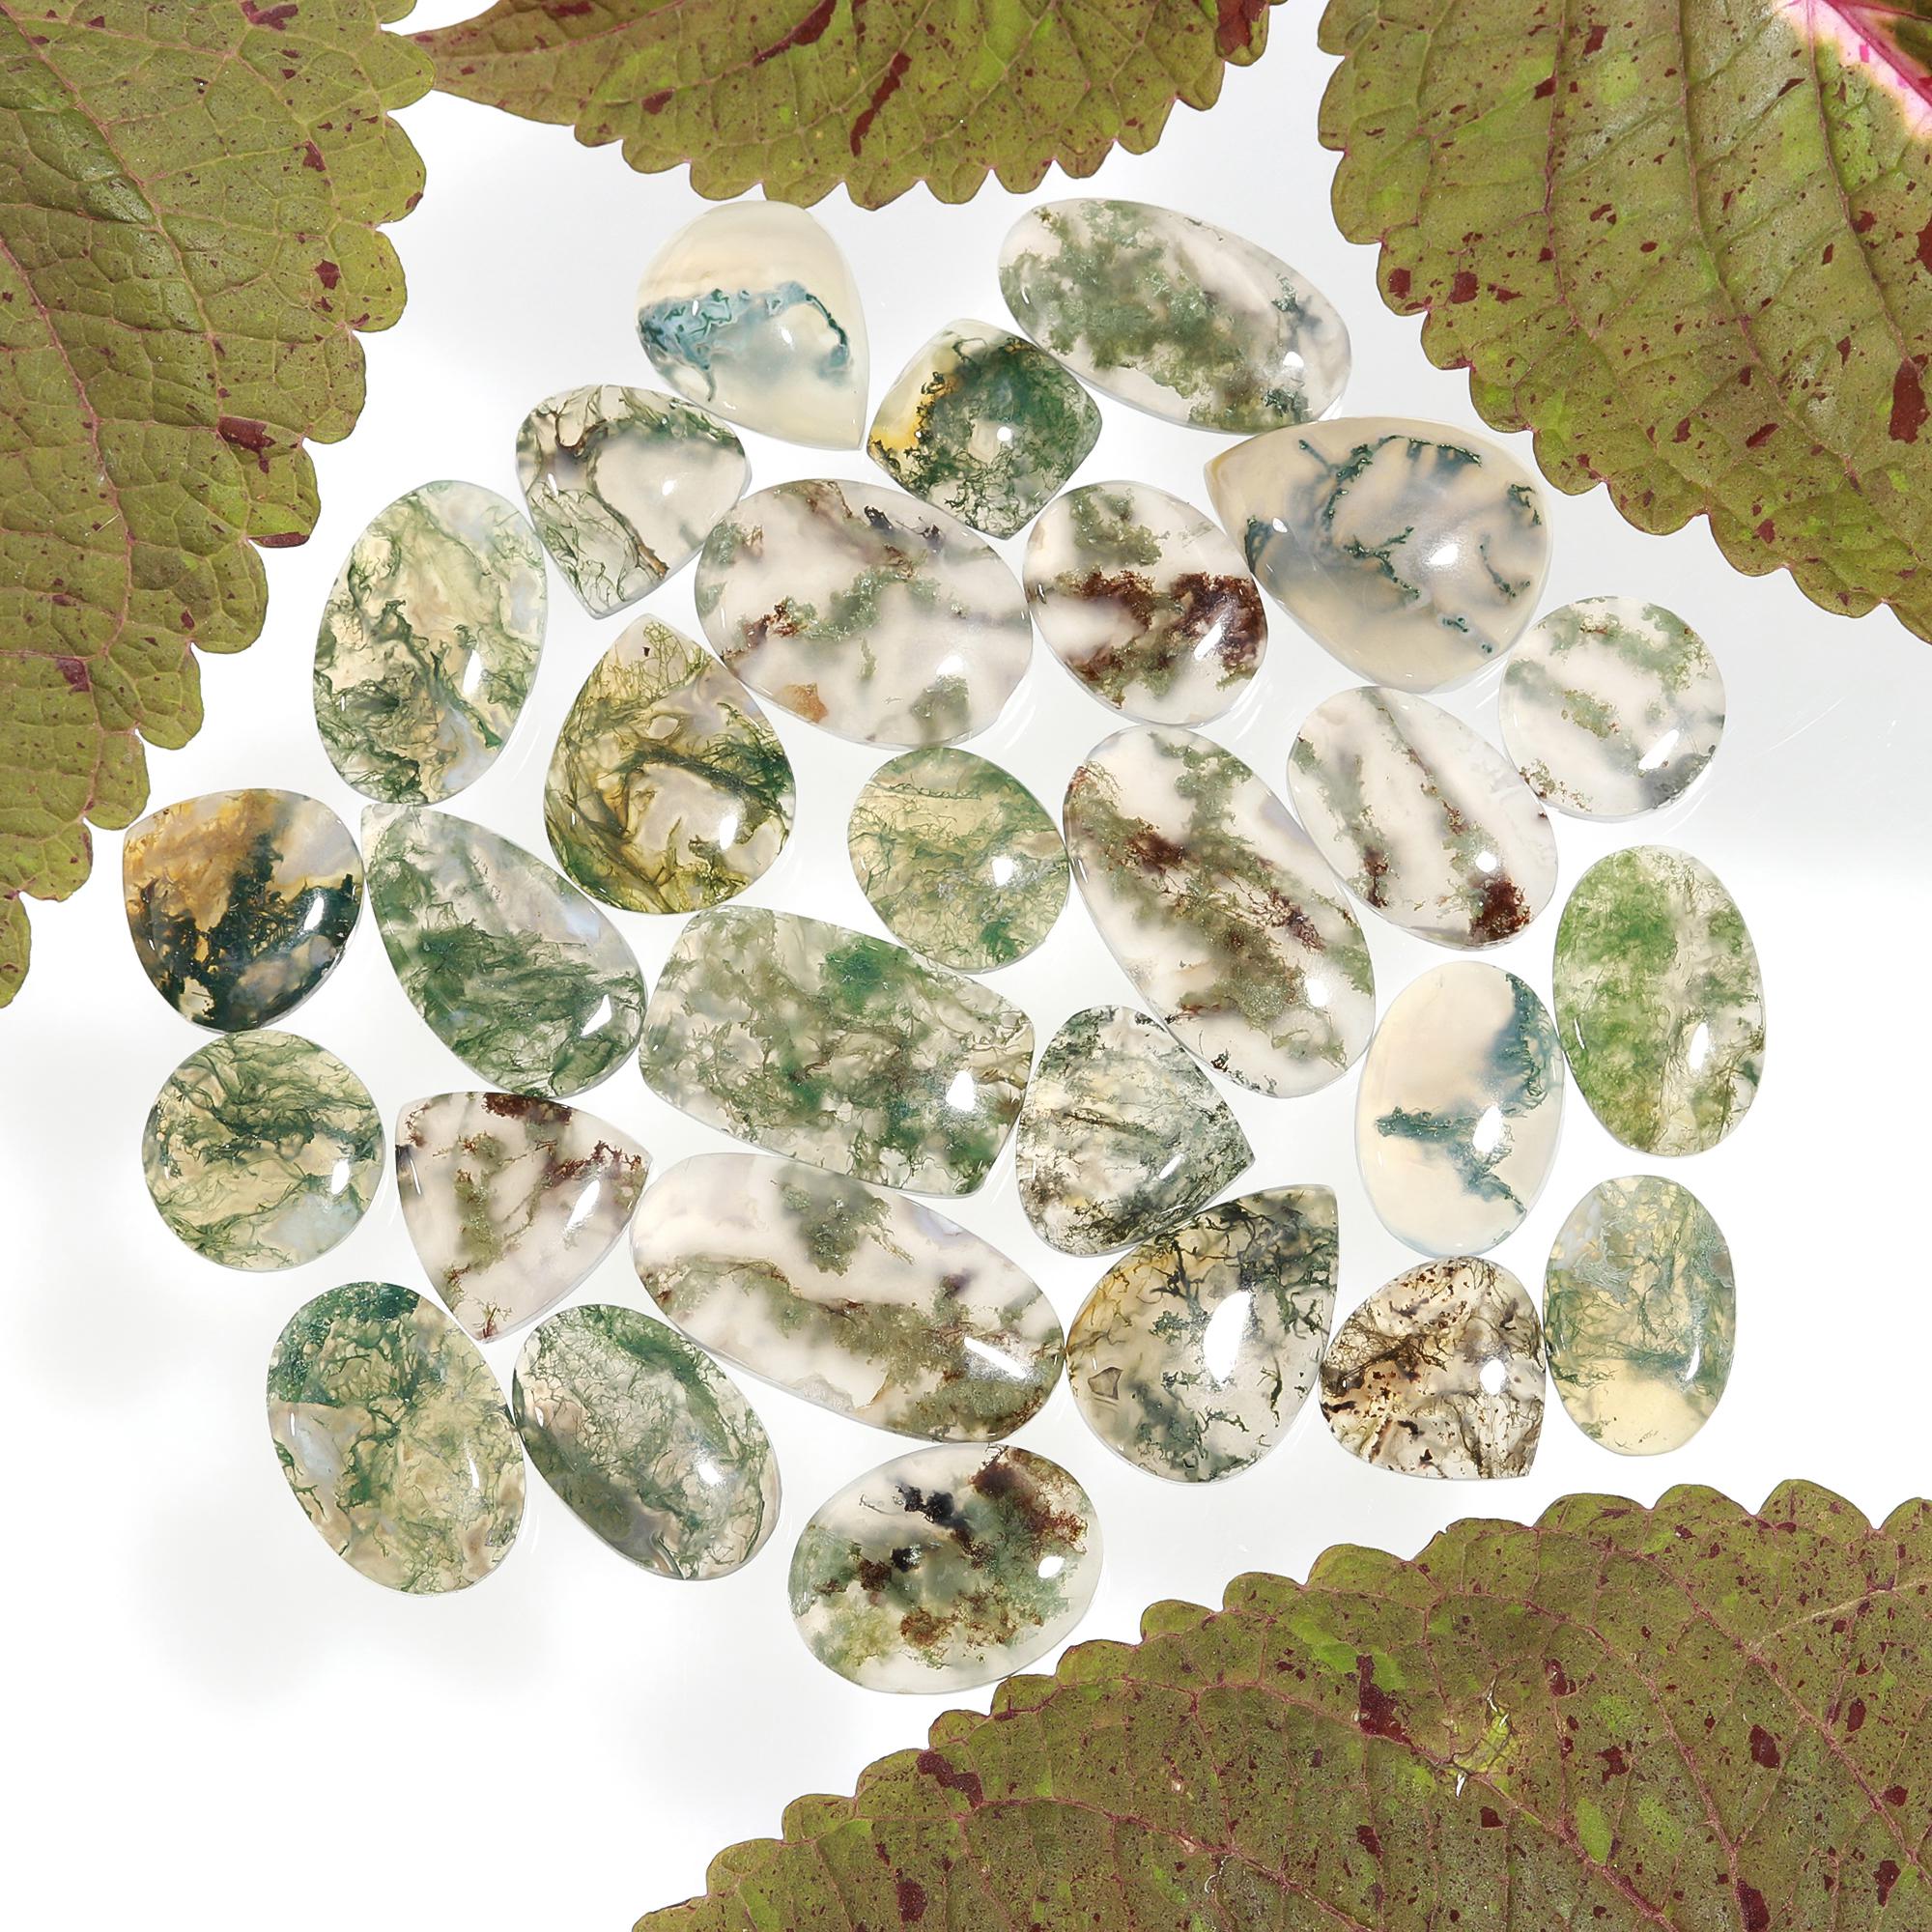 28Pcs lot 301Cts Natural Green Moss Agate Cabochon Lots Mixed Shapes And Sizes Moss Agate loose gemstone Cabochon Wholesale Lot 22x12 10x10mm